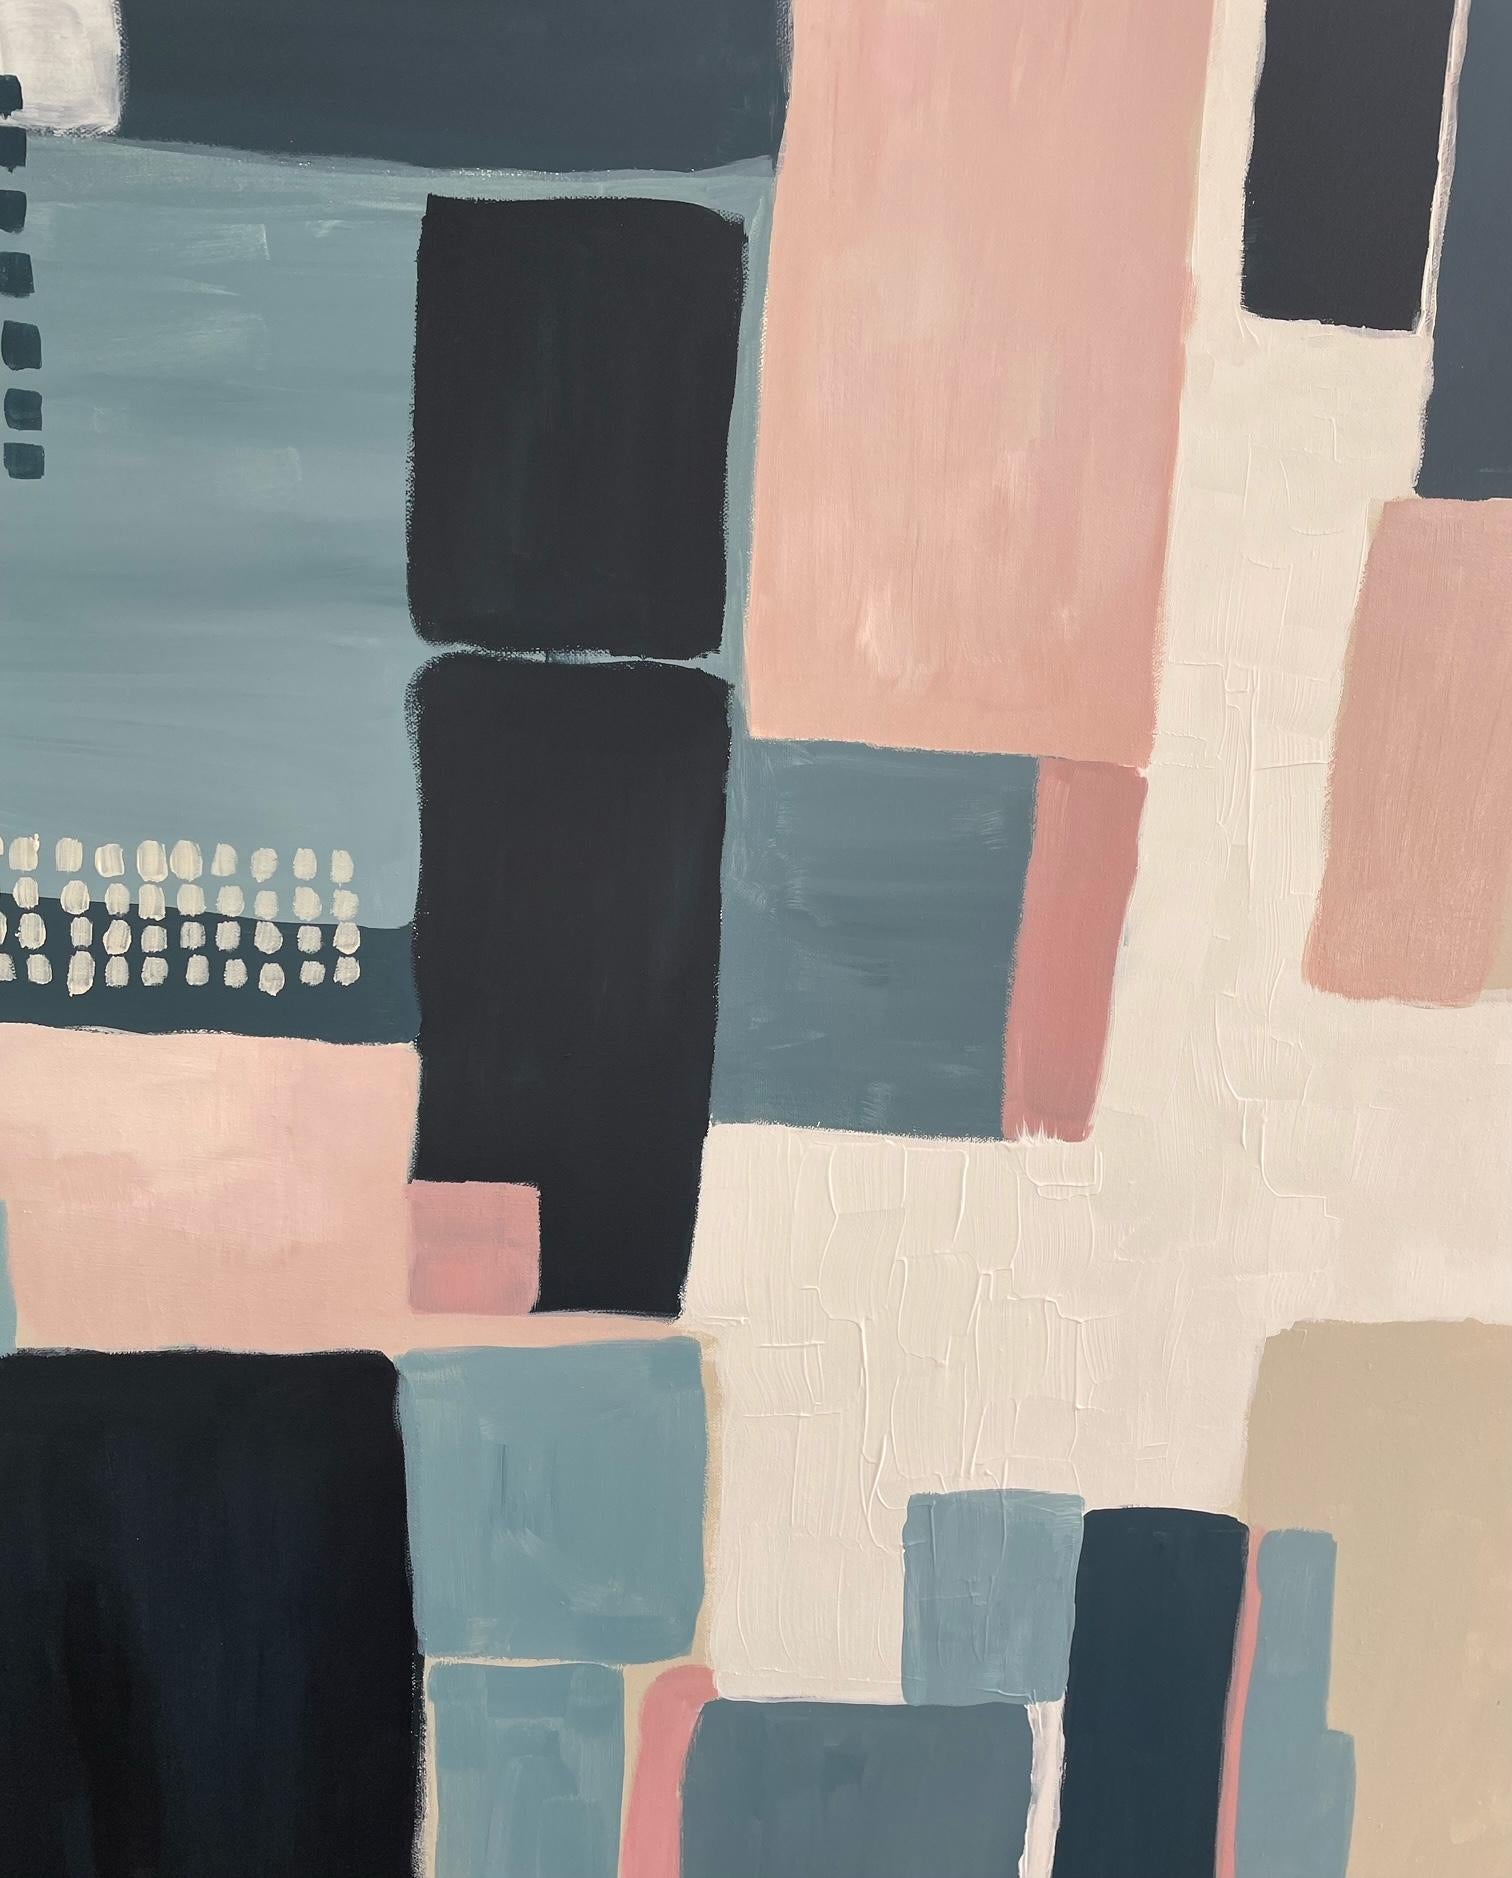 Field Patterns Blue and Pink by Fleur Park [2022]

'Field Patterns Blue and Pink' makes up one of a diptych by artist Fleur Park. This painting features her signature pattern making quilted together with geometric shapes which move the viewers gaze